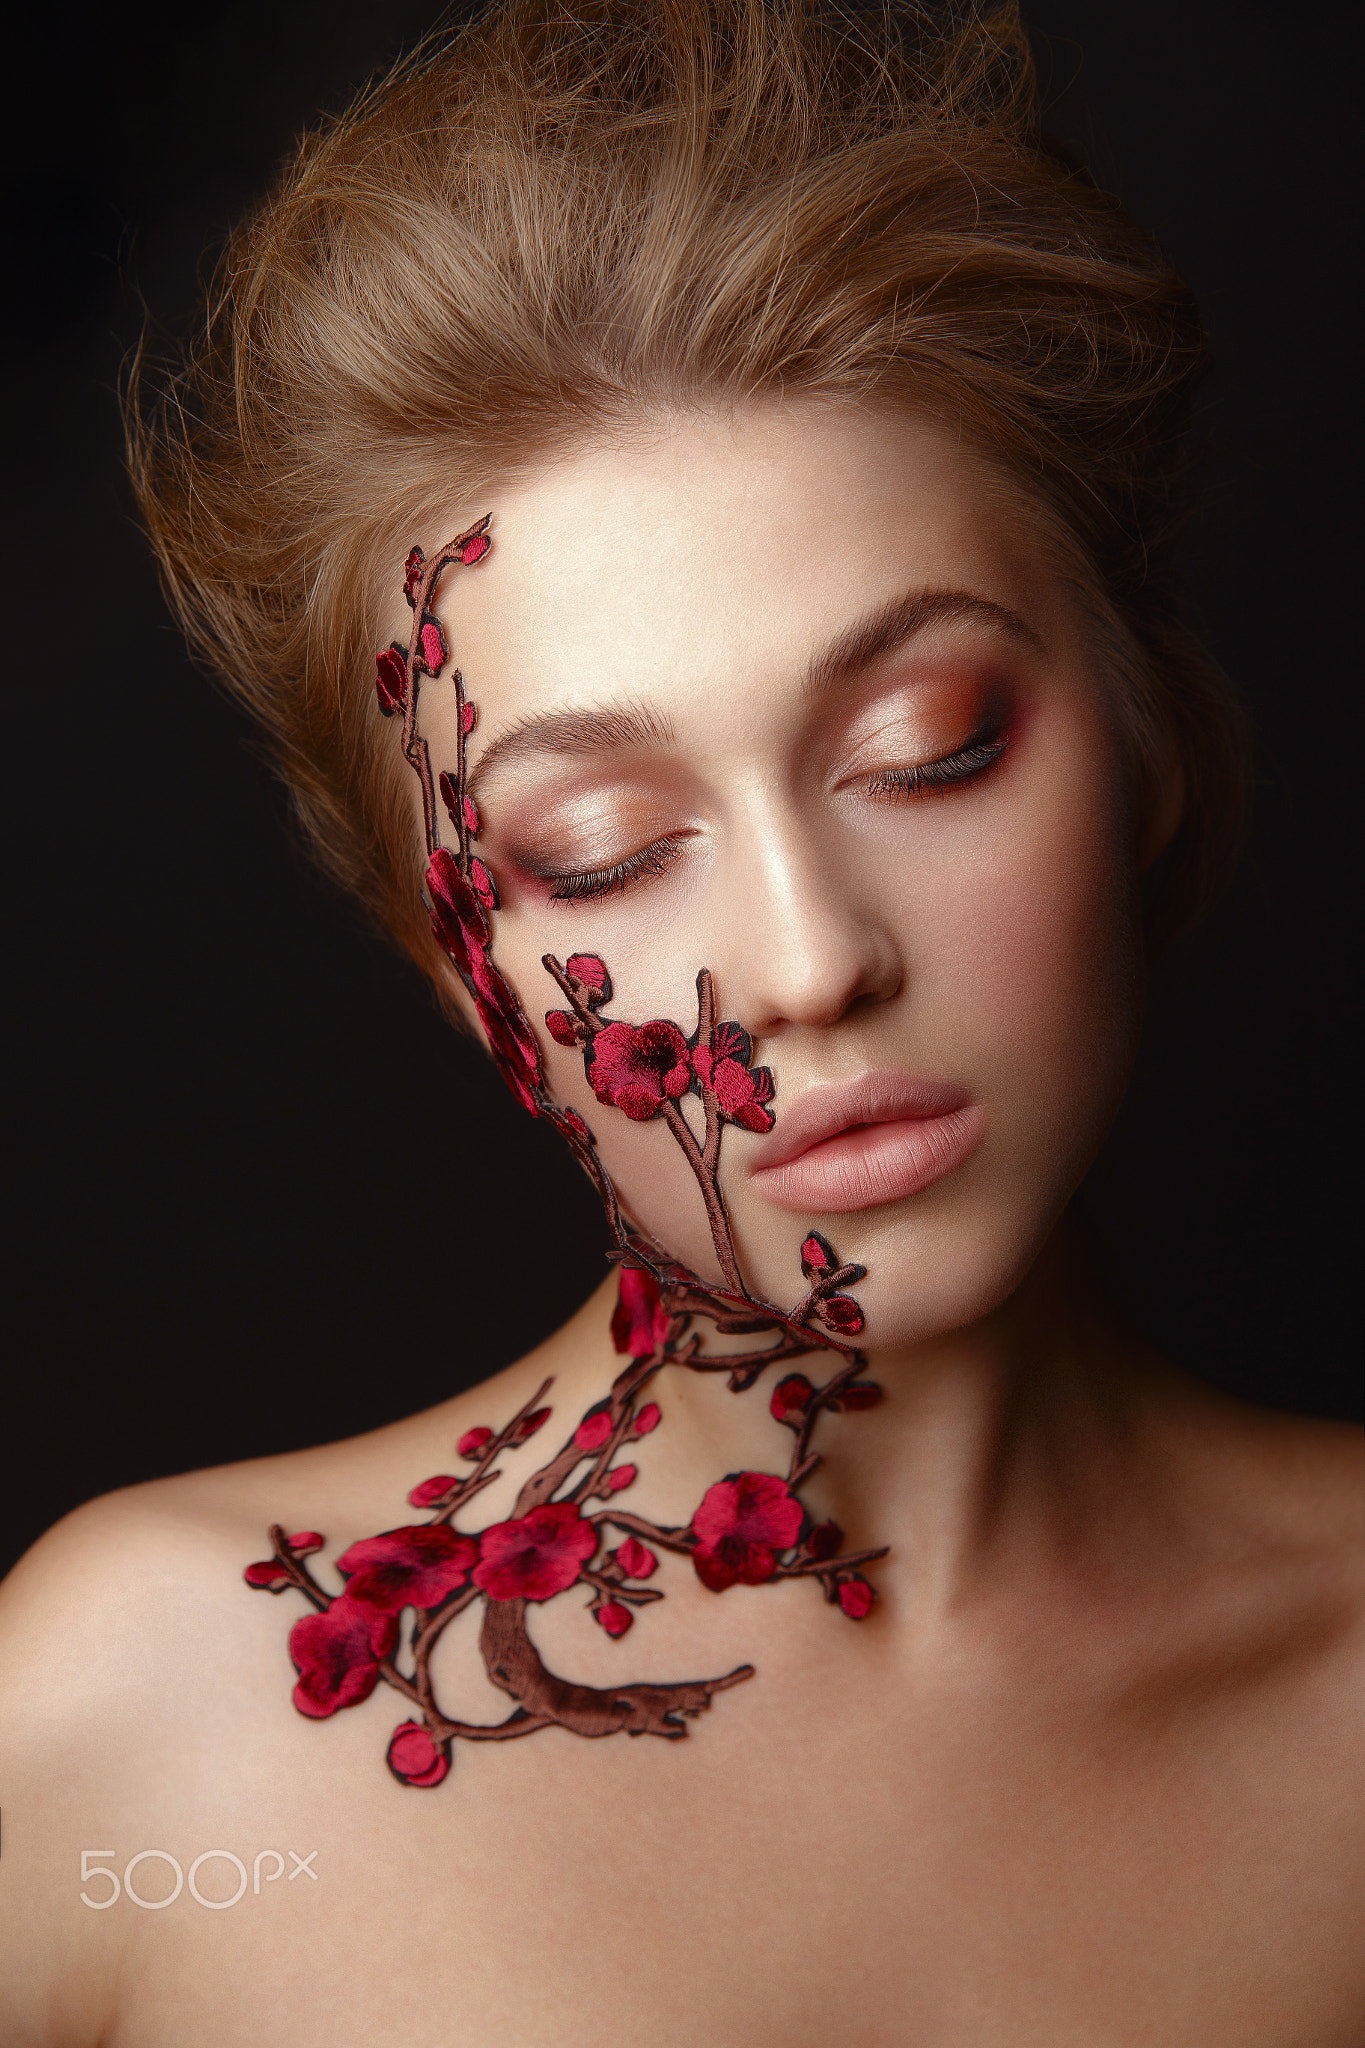 Young woman with flower makeup